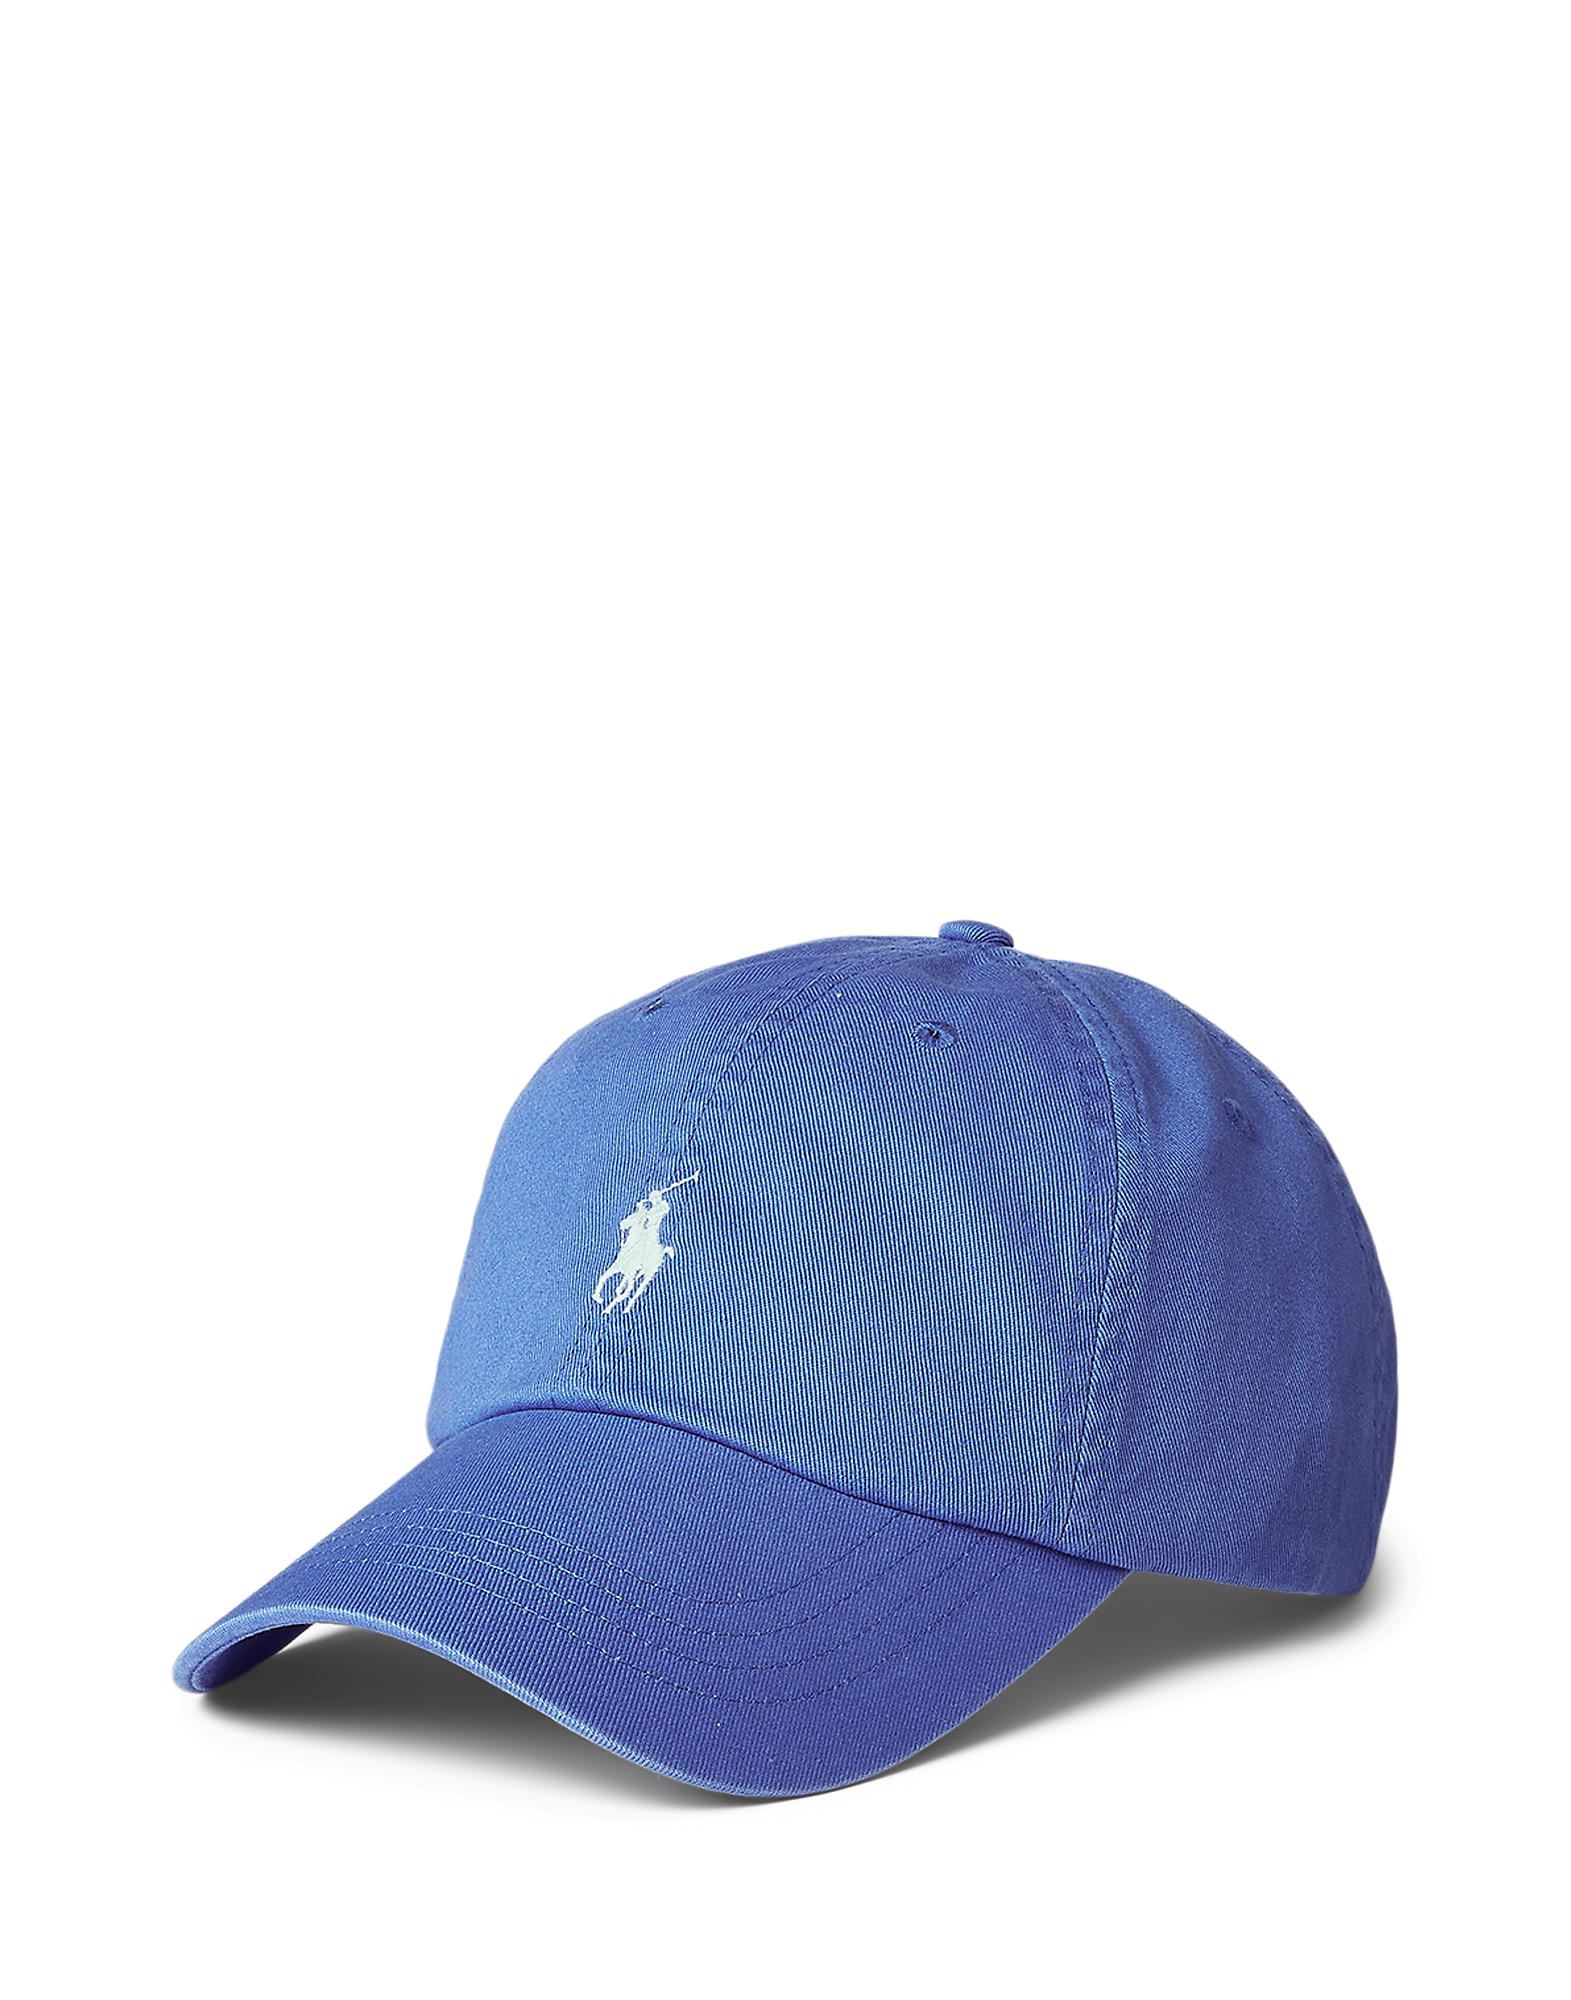 Polo Ralph Lauren Hats In Old Royal